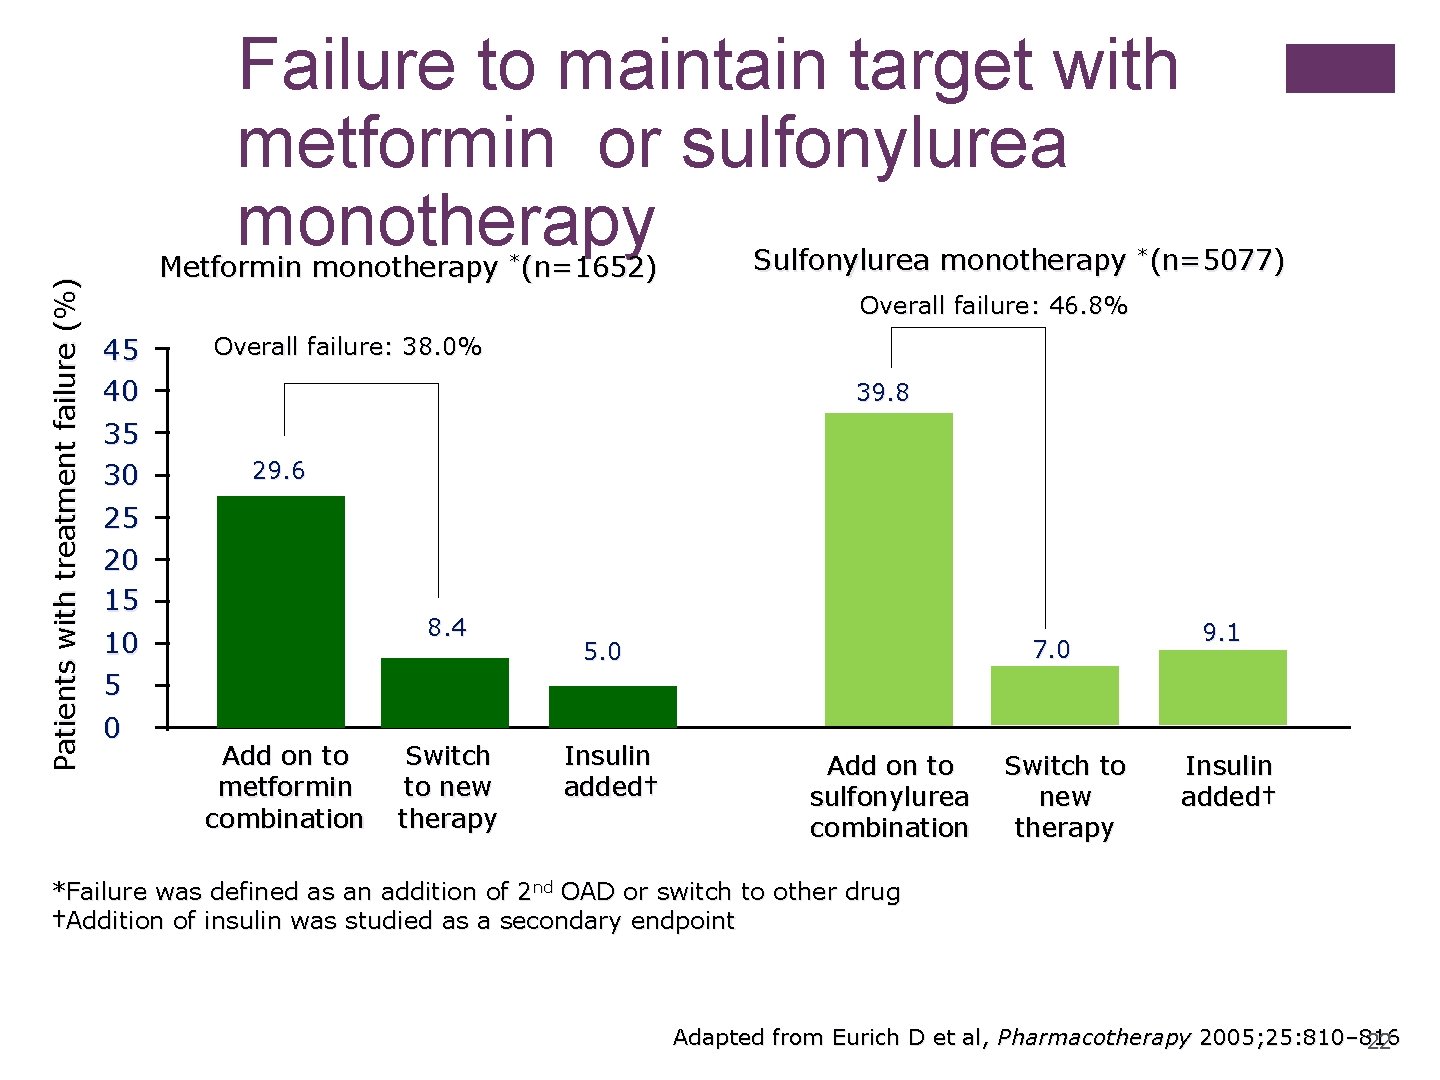 Patients with treatment failure (%) Failure to maintain target with metformin or sulfonylurea monotherapy